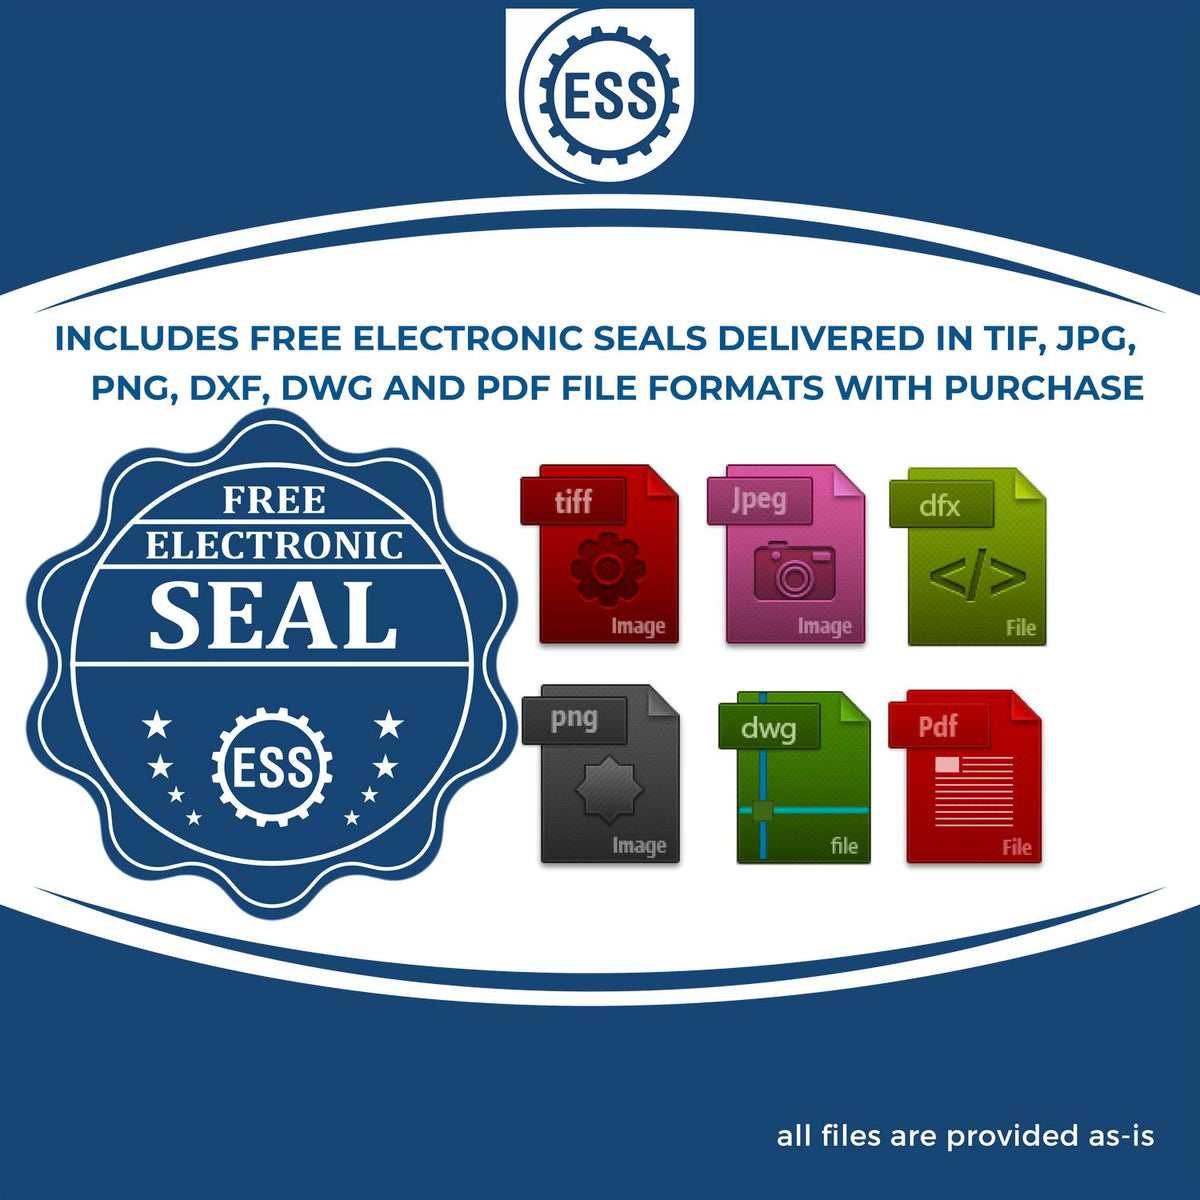 An infographic for the free electronic seal for the Heavy Duty Cast Iron California Engineer Seal Embosser illustrating the different file type icons such as DXF, DWG, TIF, JPG and PNG.